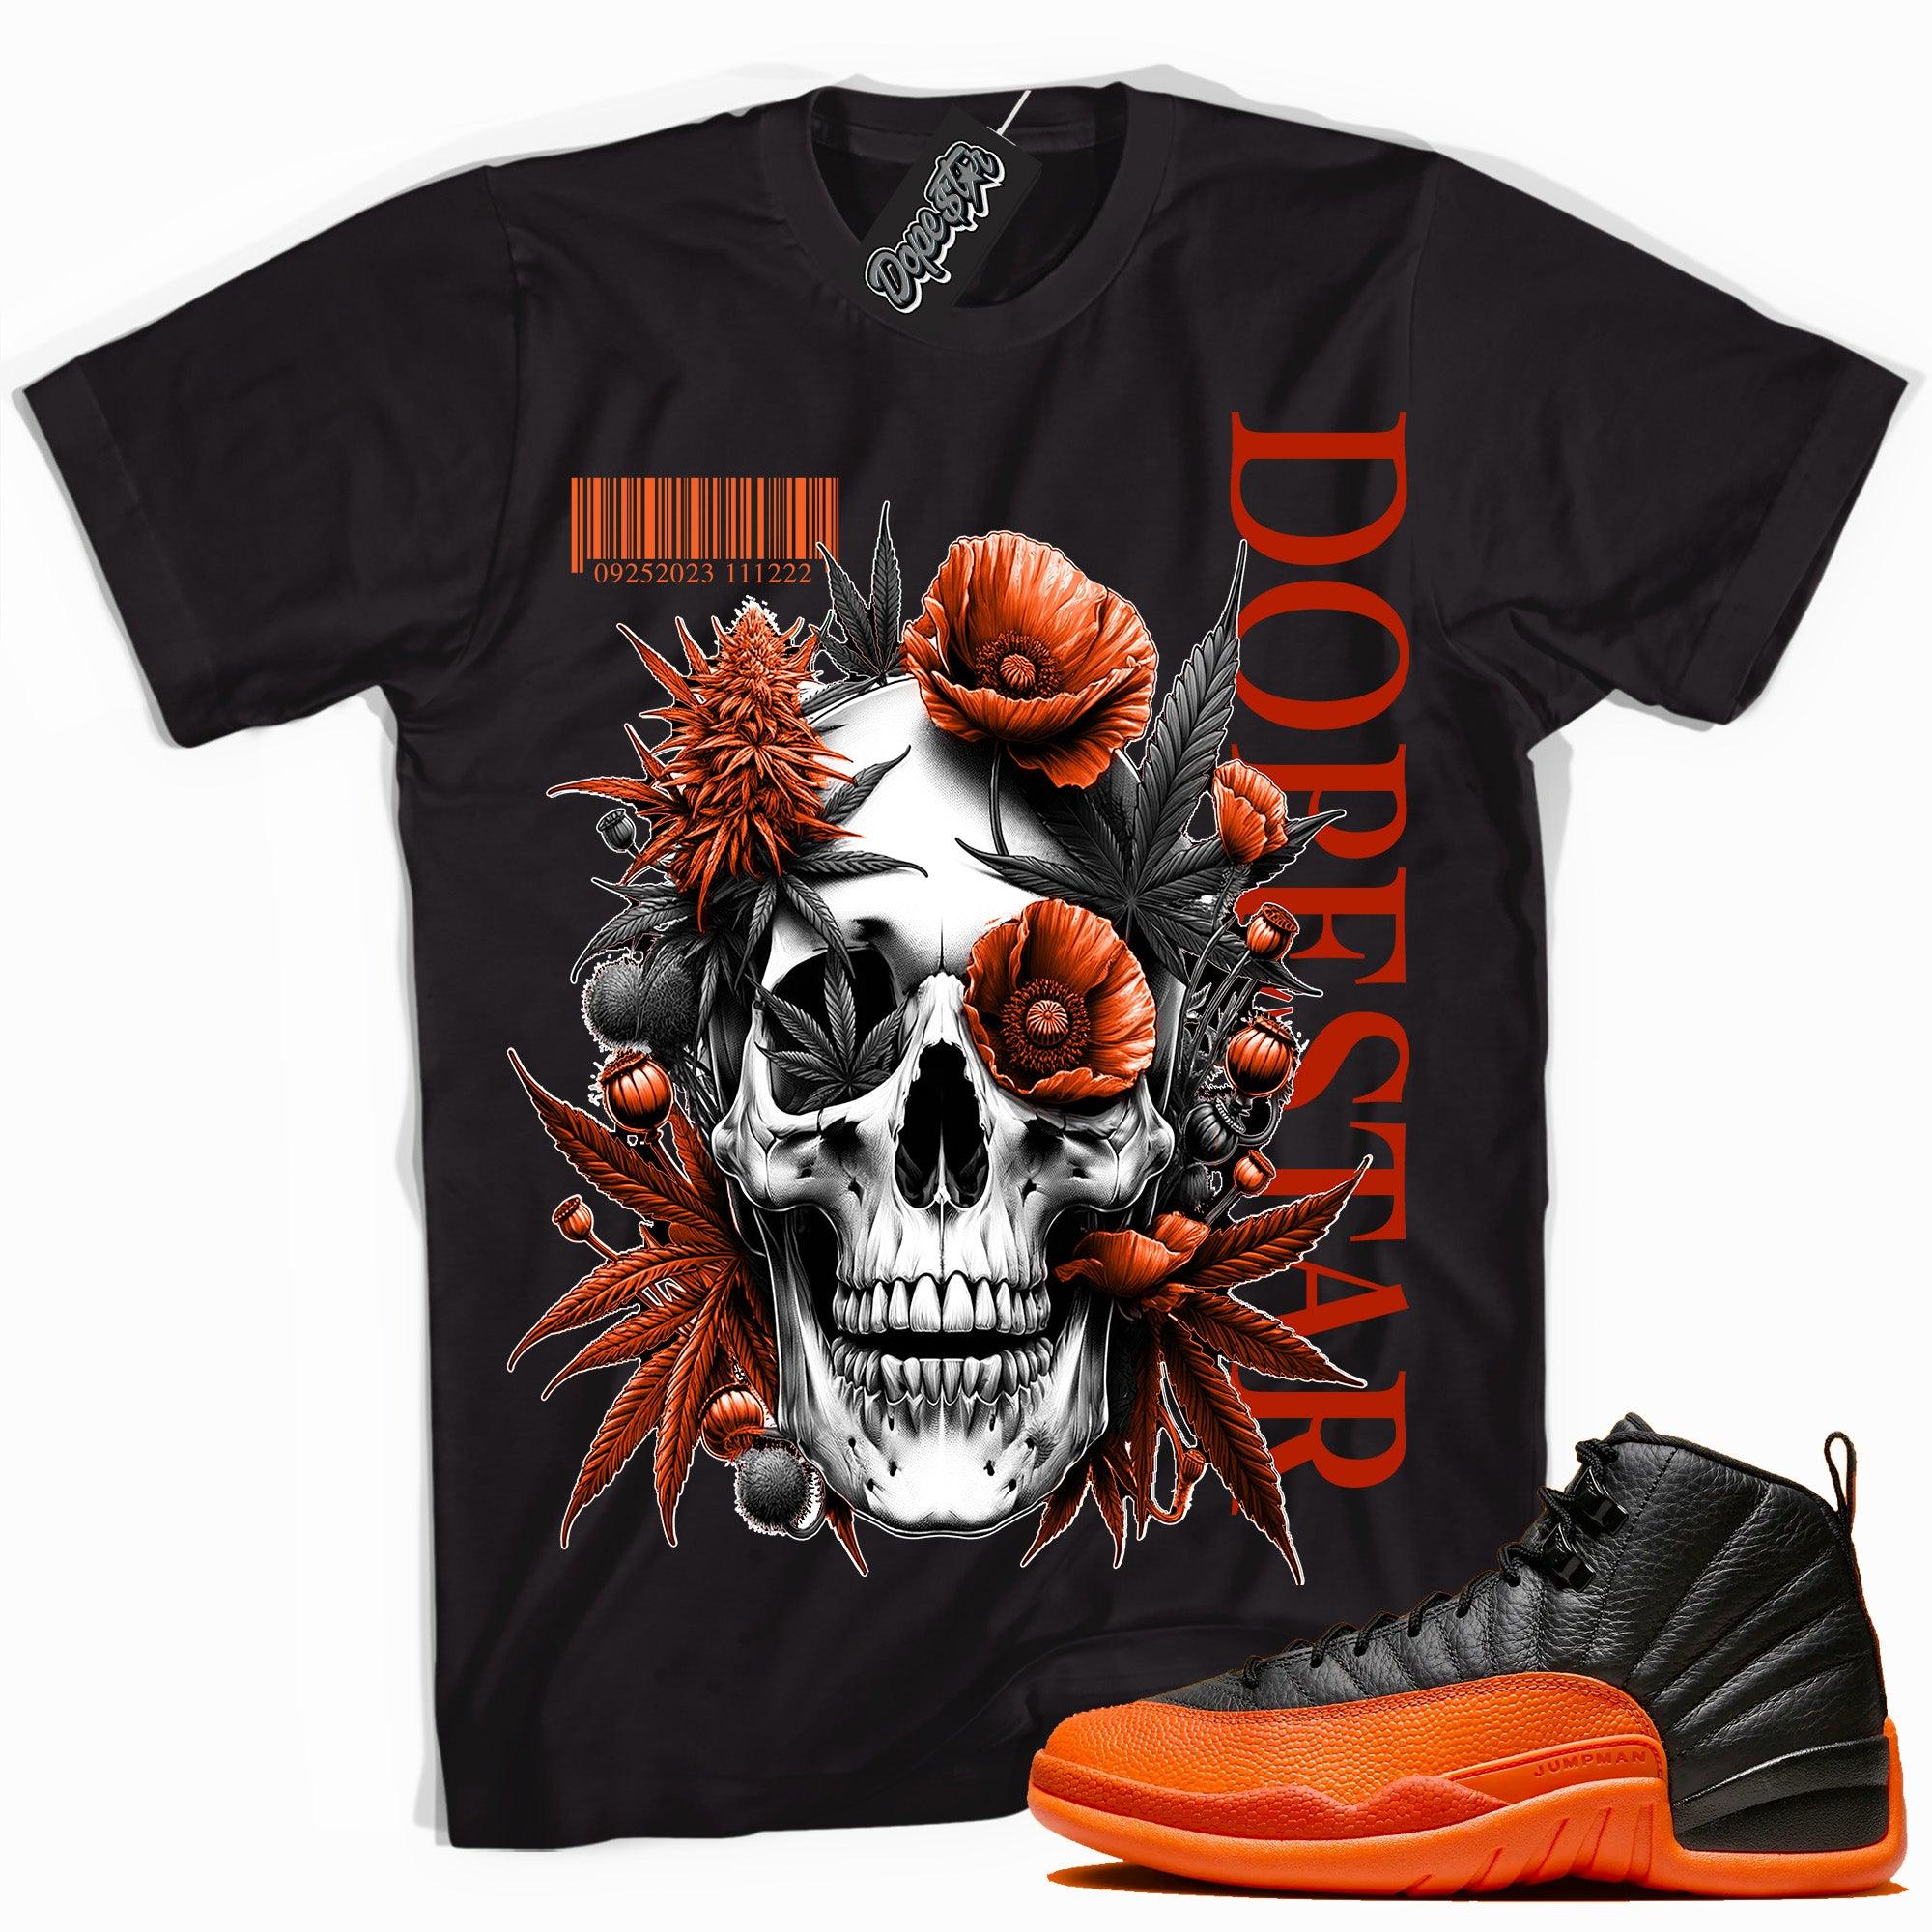 Cool Black graphic tee with “ Skull Cannabis Poppies ” print, that perfectly matches Air Jordan 12 Retro WNBA All-Star Brilliant Orange sneakers 